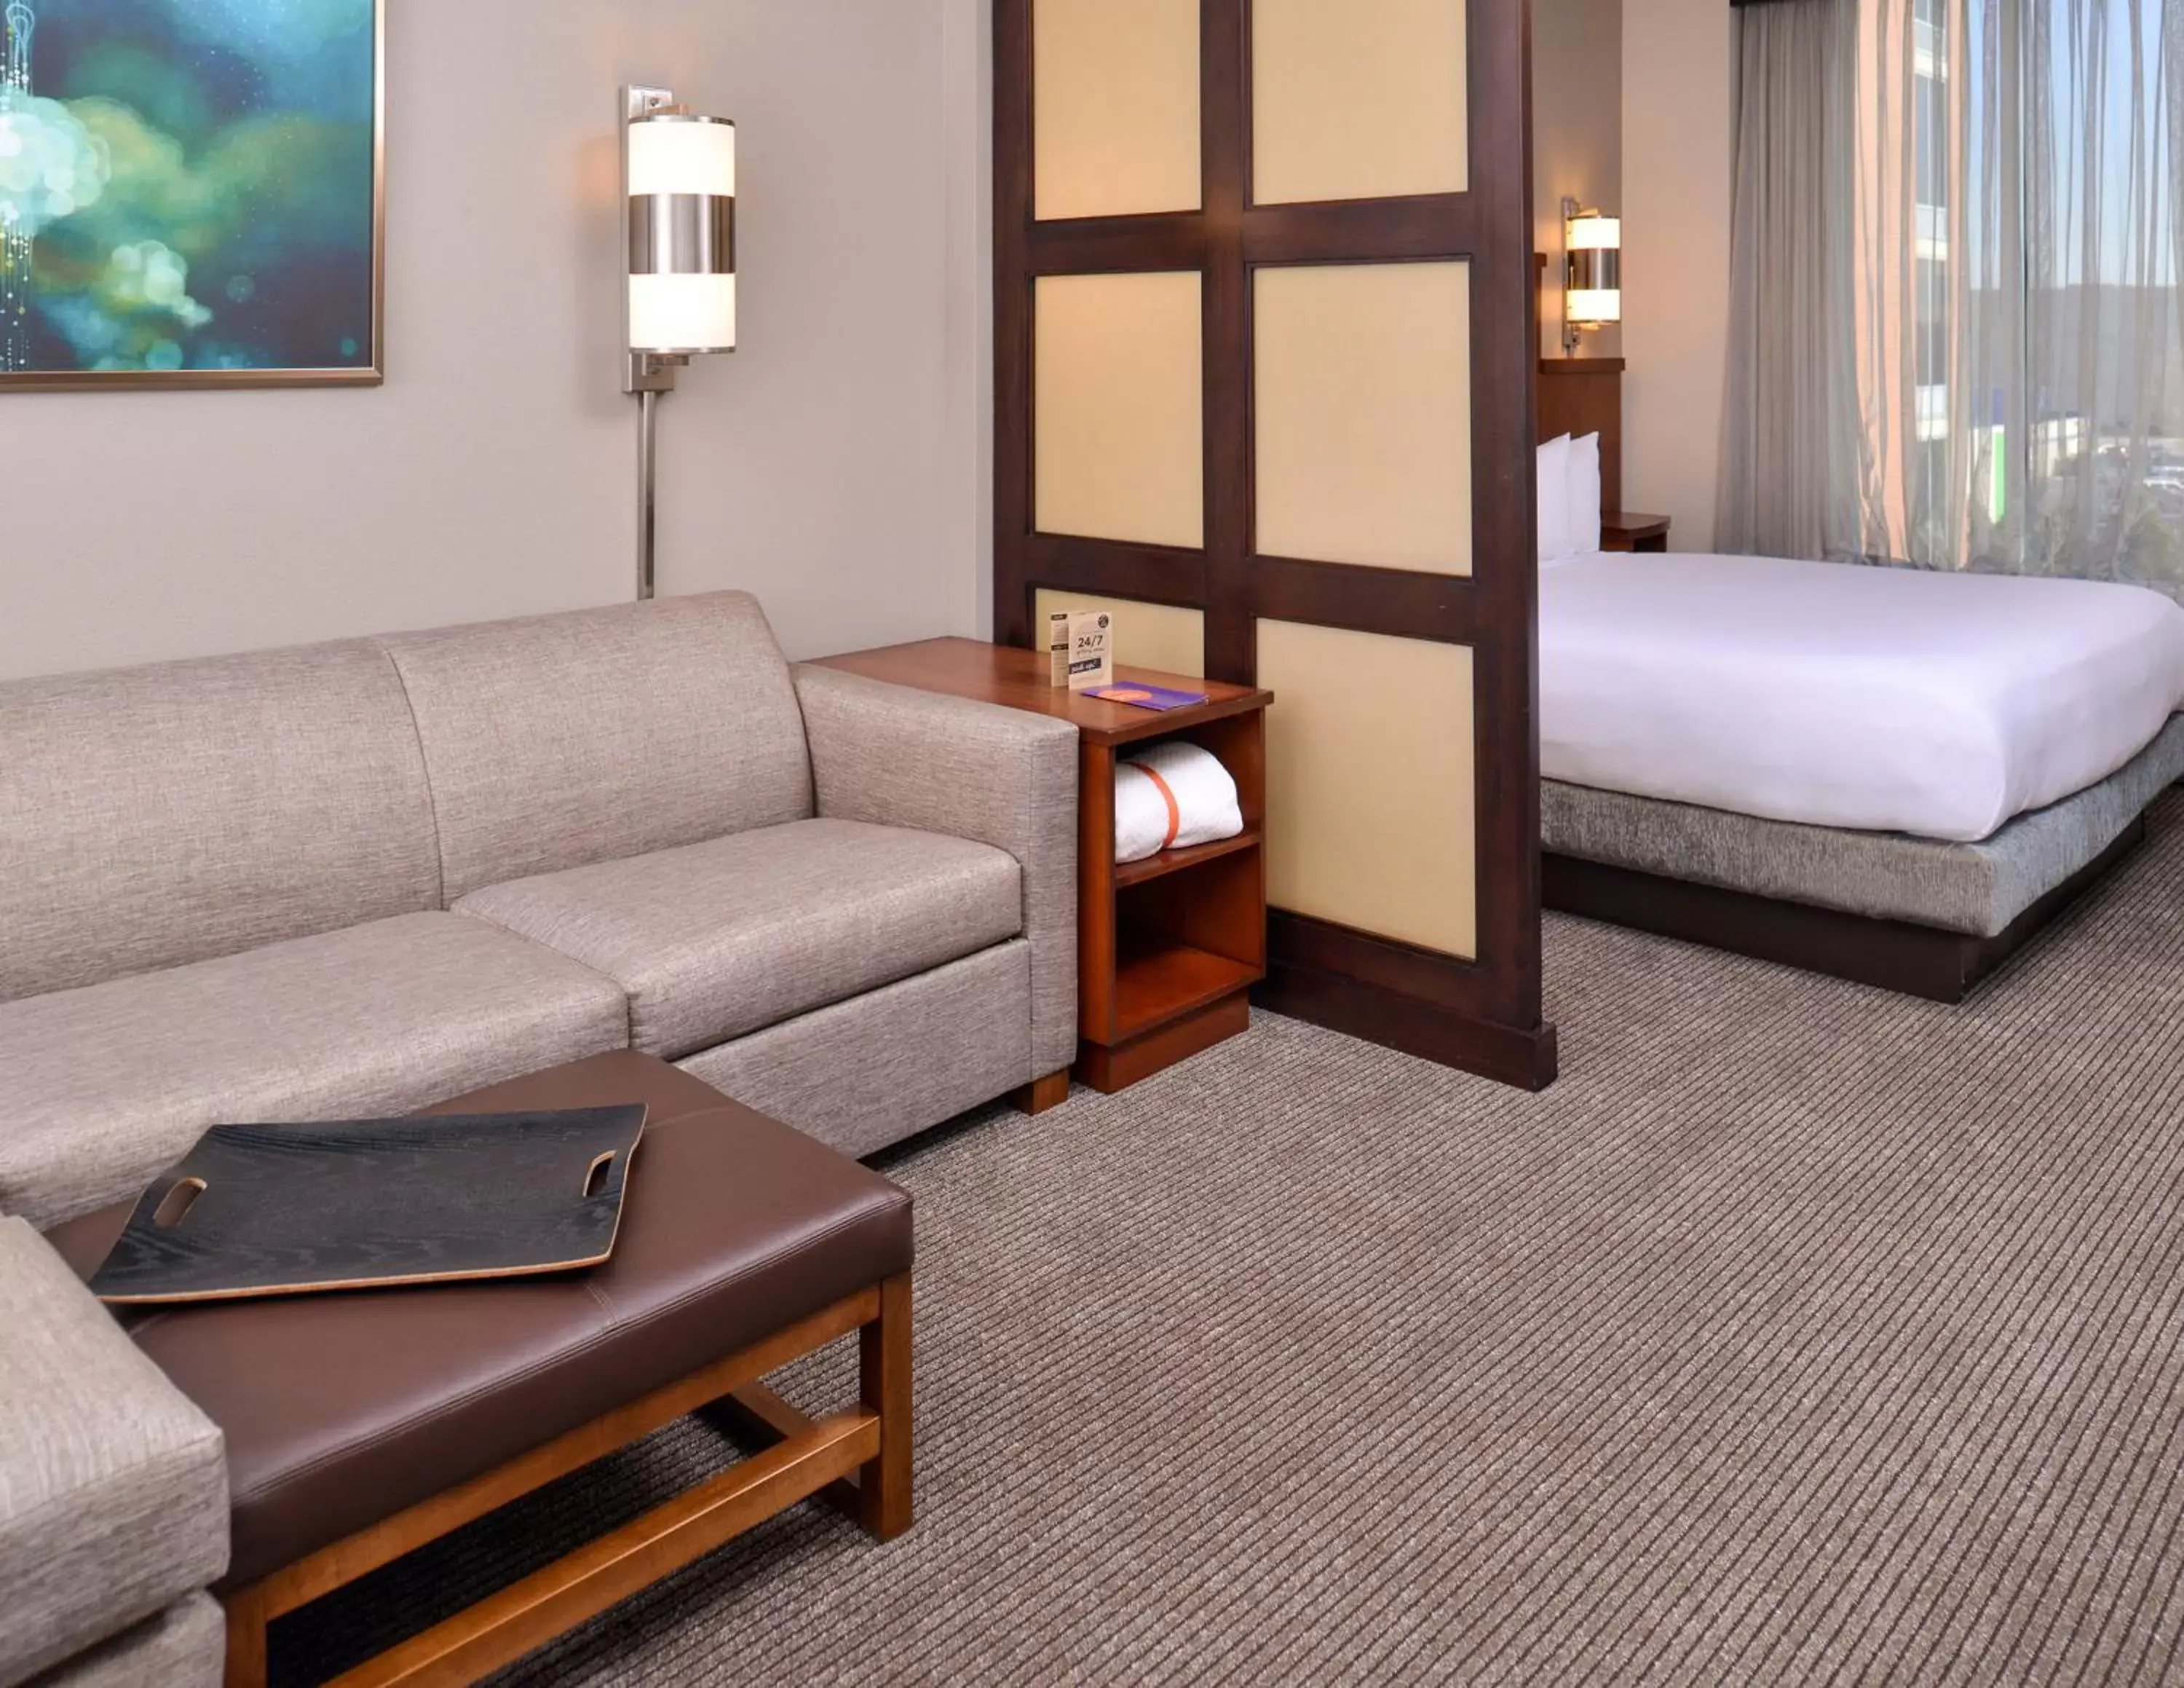 King Room with Sofa Bed in Hyatt Place Garden City